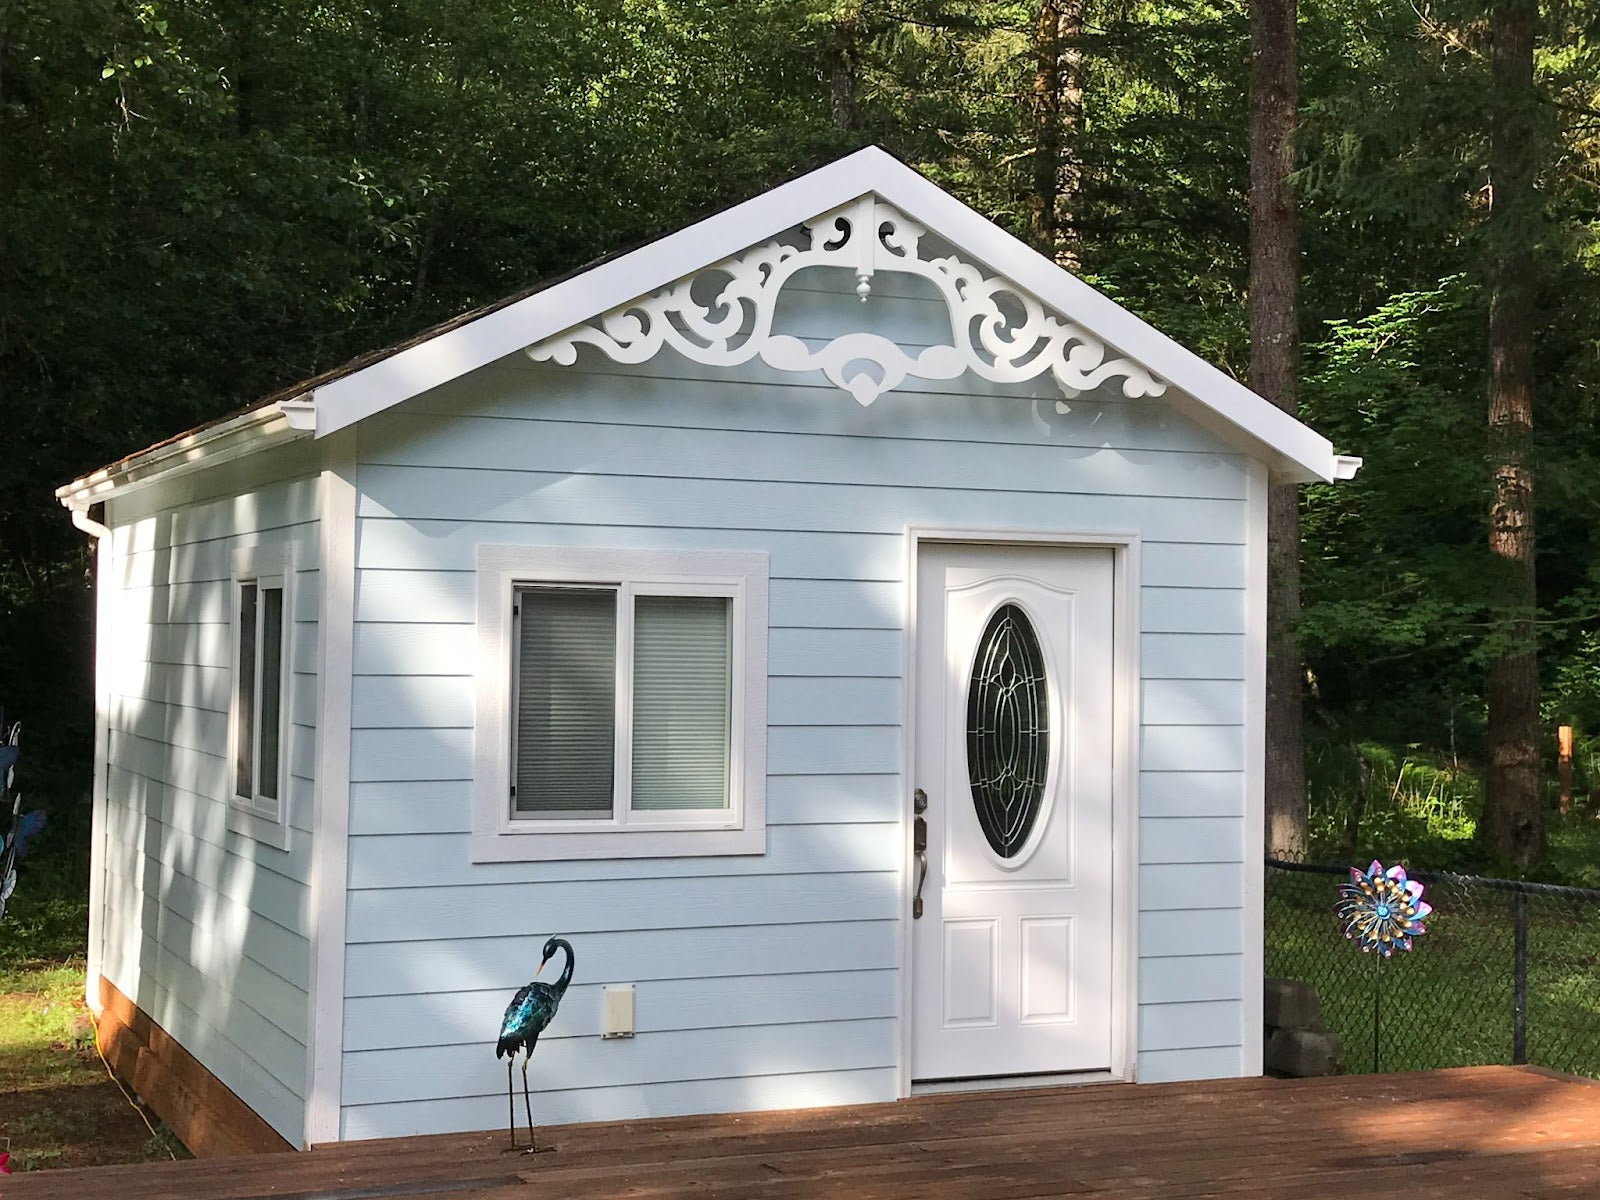 This GD622 gable bracket transforms an otherwise boring backyard shed.